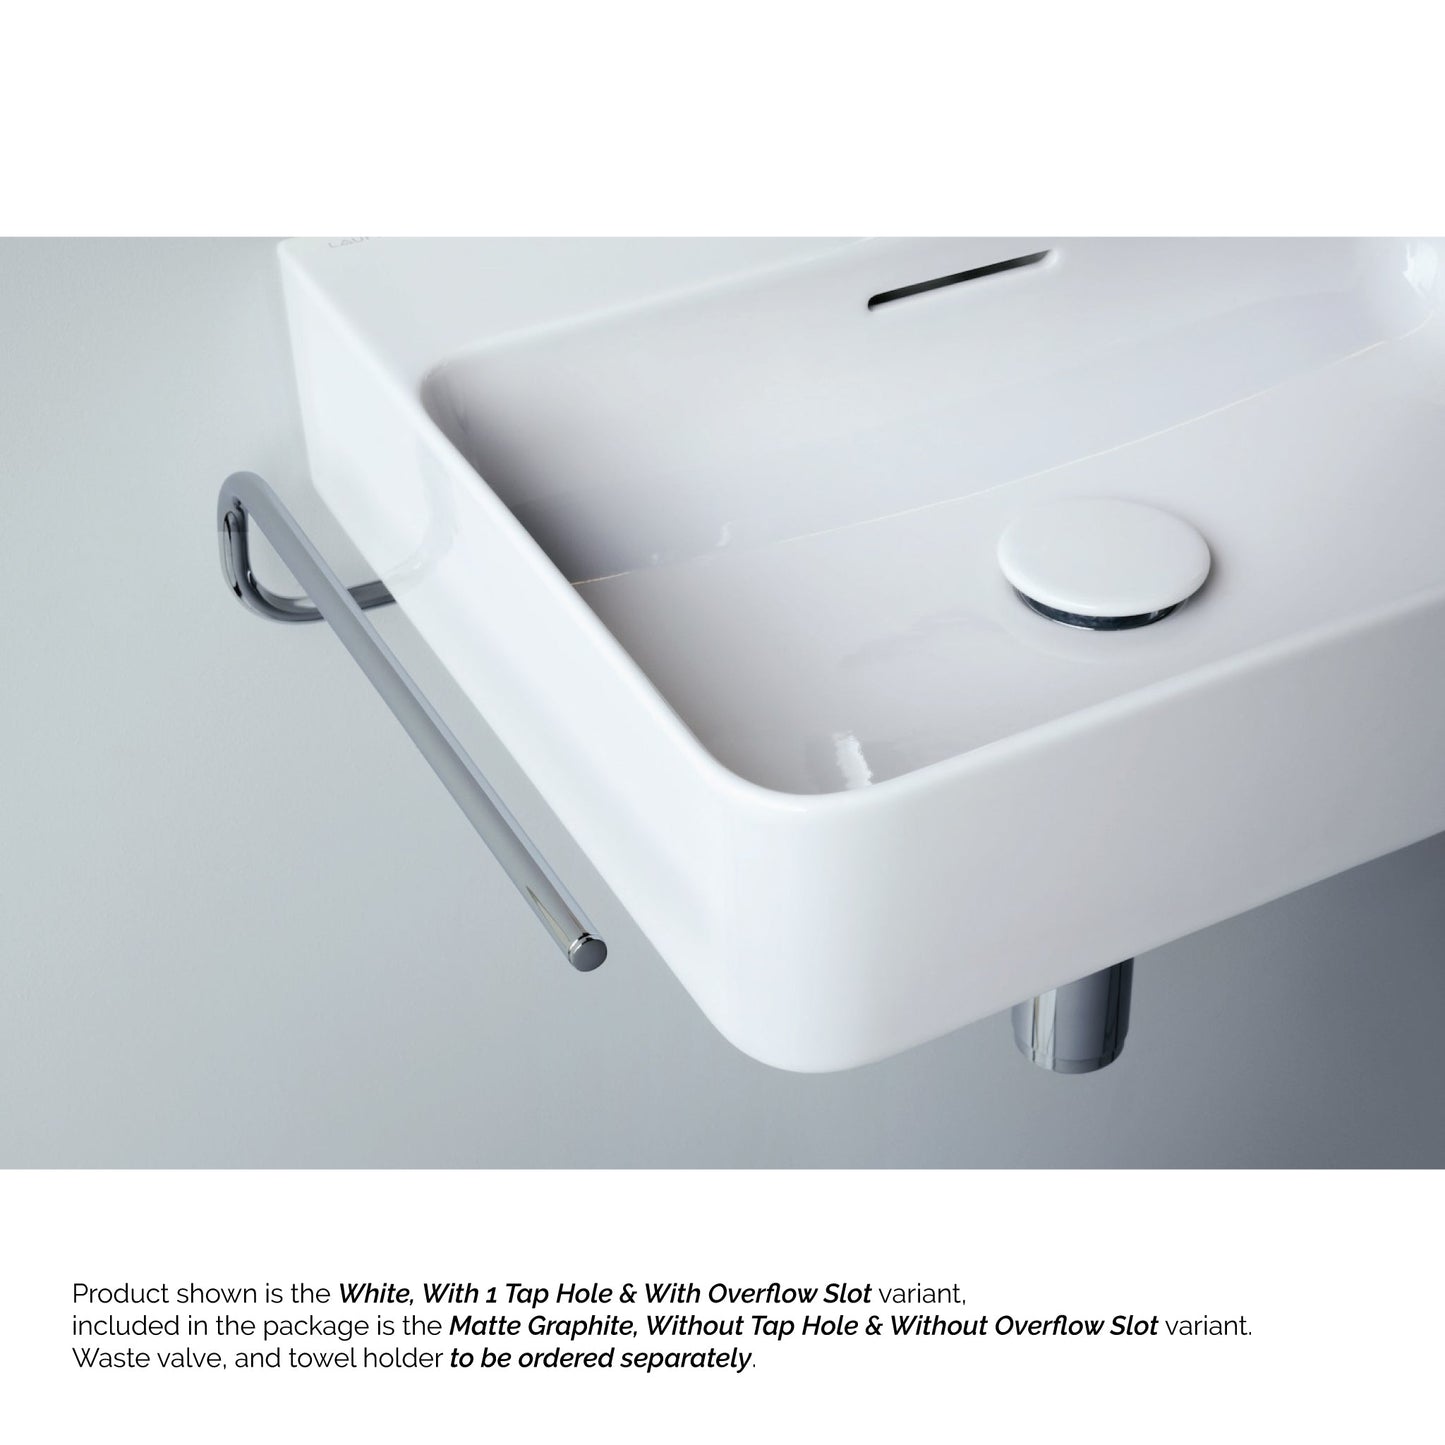 Laufen Val 24" x 12" Rectangular Matte Graphite Wall-Mounted Bathroom Sink Without Facuet Holes and Overflow Slot